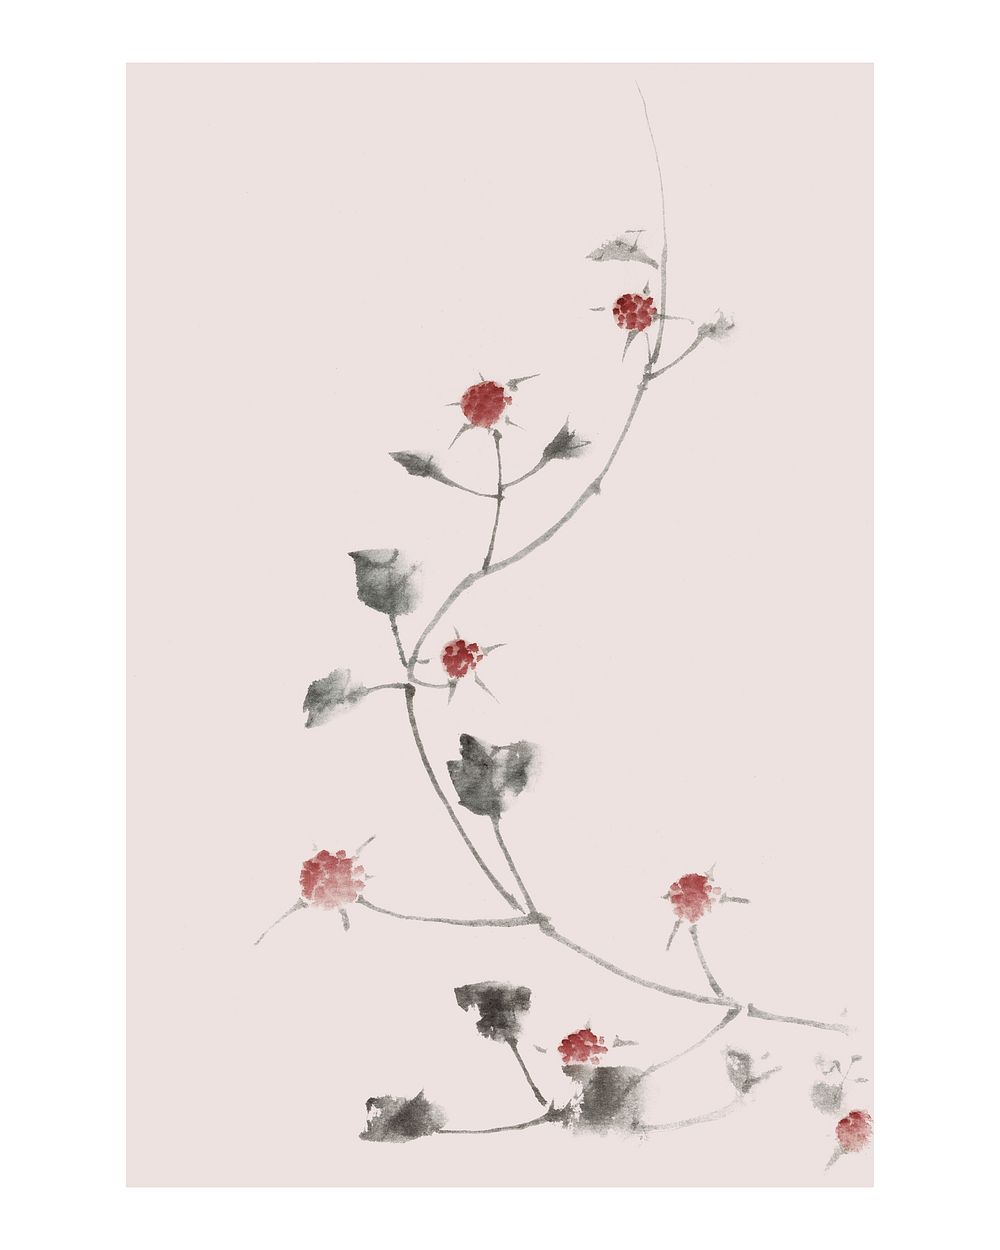 Red blossoms vintage illustration wall art print and poster. Remix of original painting by Hokusai.